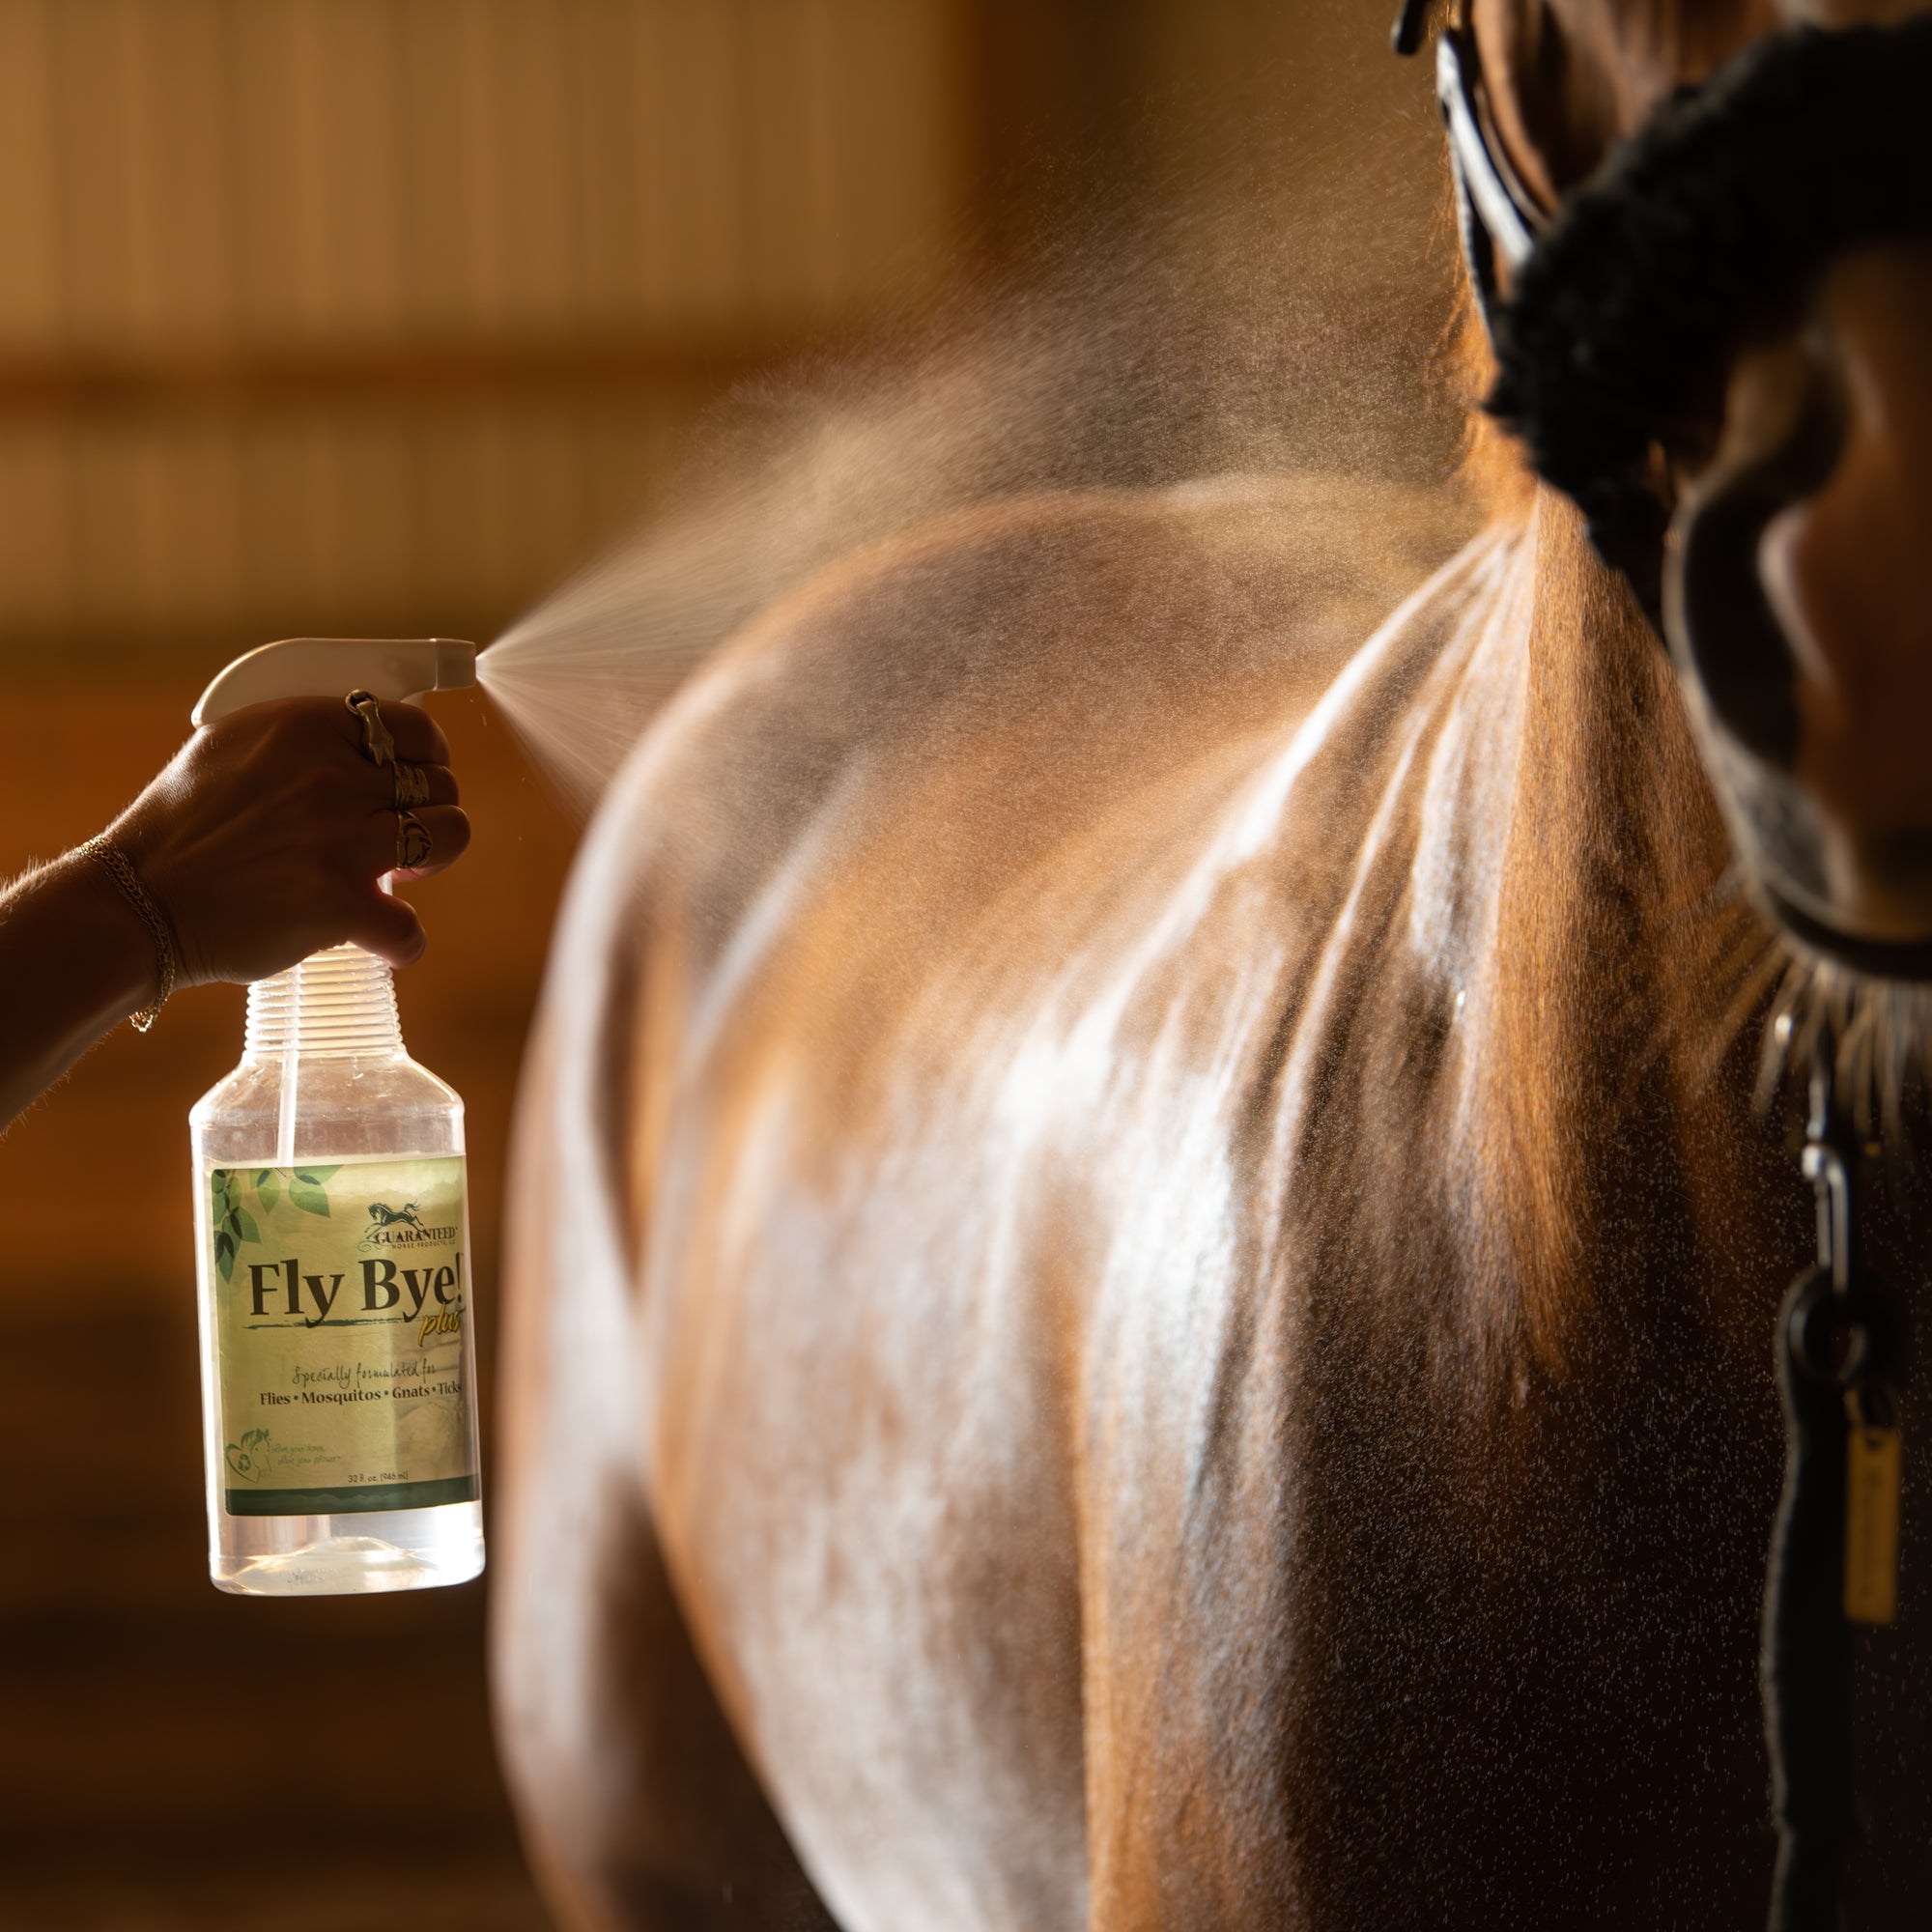 Fly Bye! Plus fly spray for horses with sensitive skin